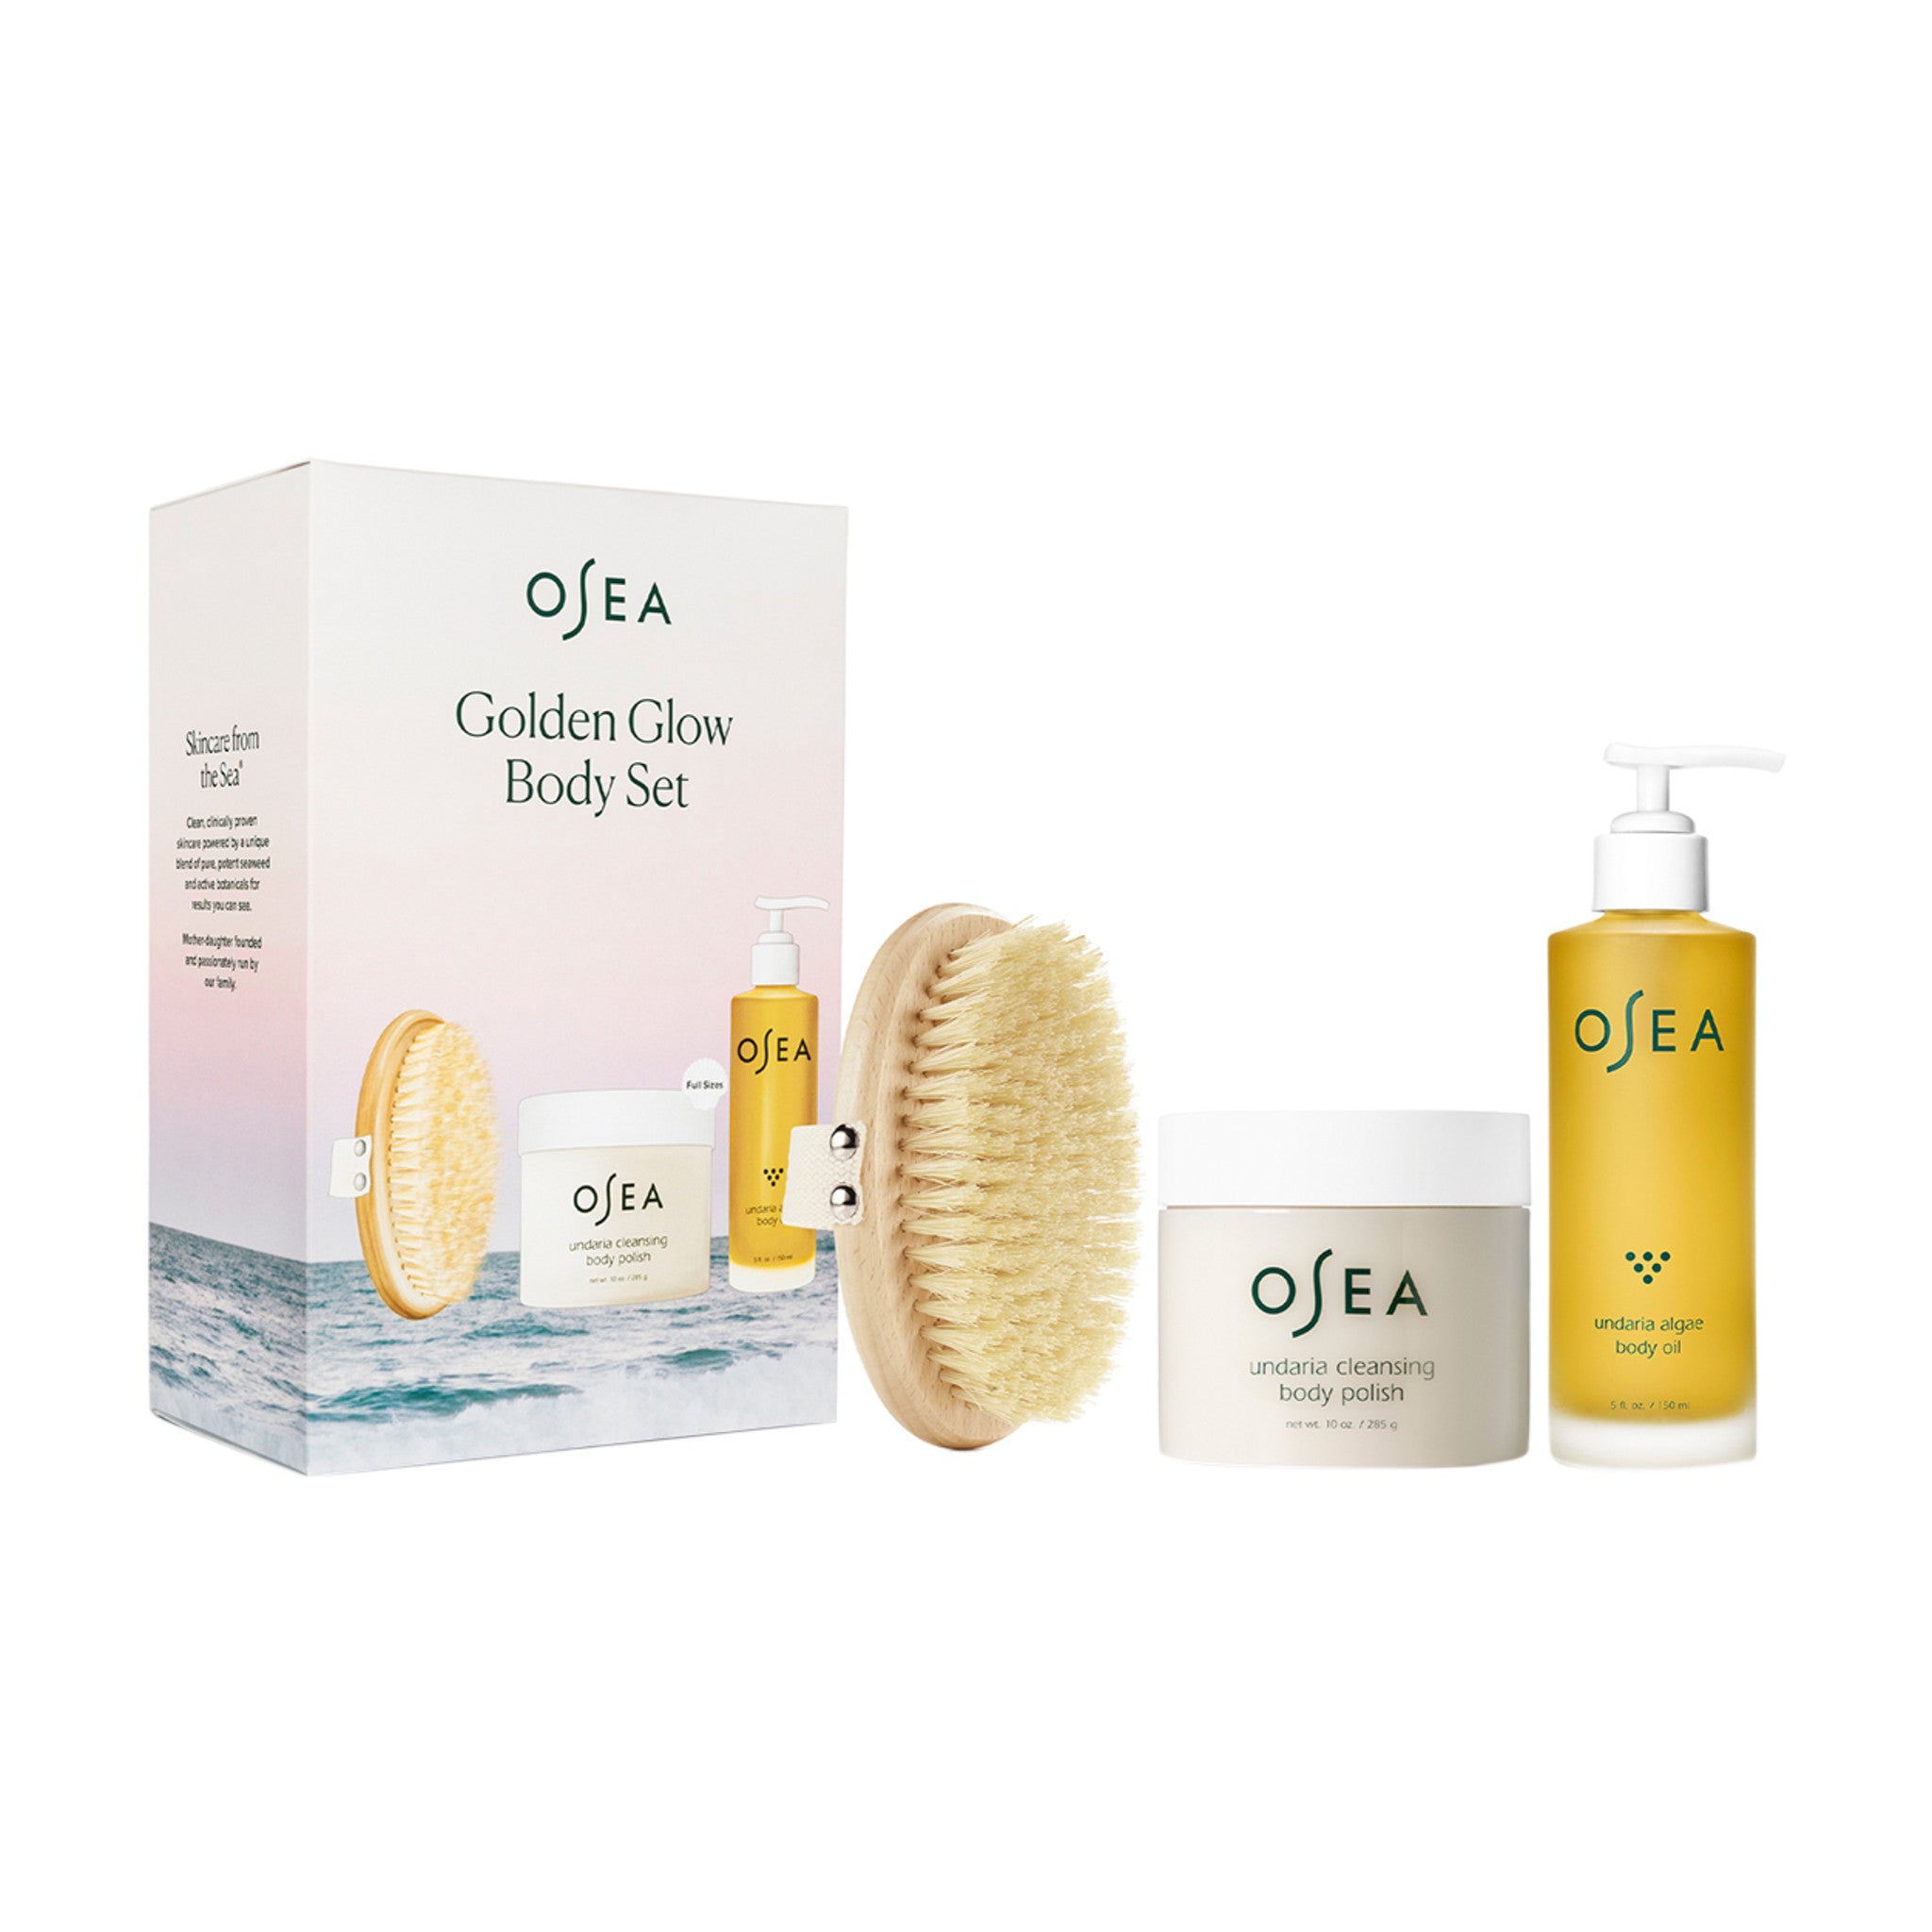 OSEA Golden Glow Body Set (Limited Edition) main image.